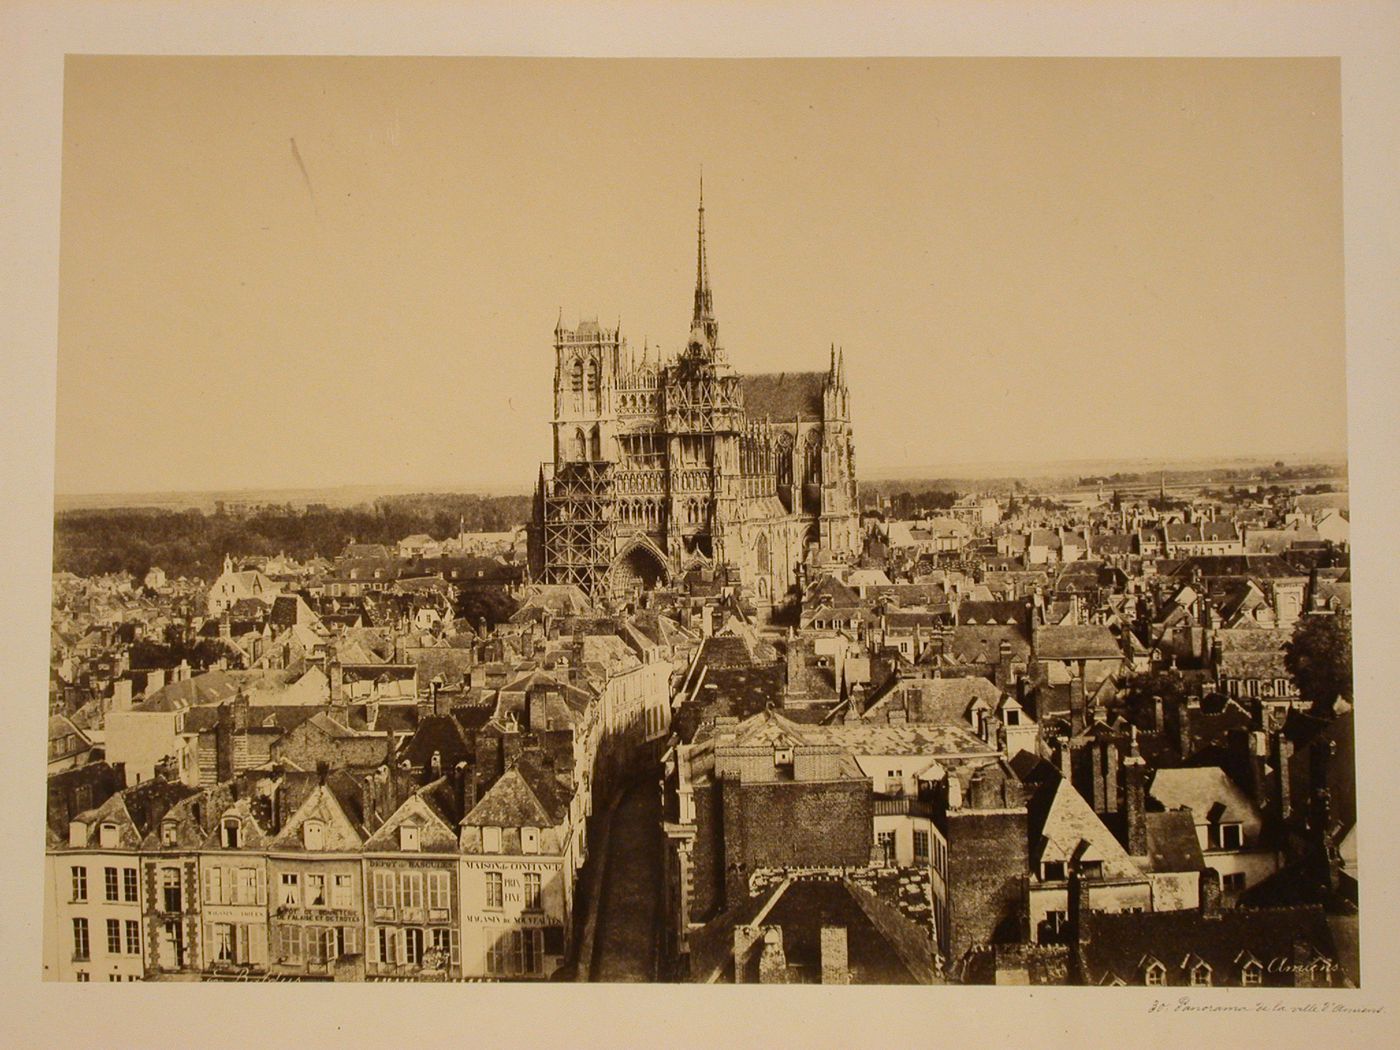 Panoramic view of town and facade of cathedral, Amiens, France